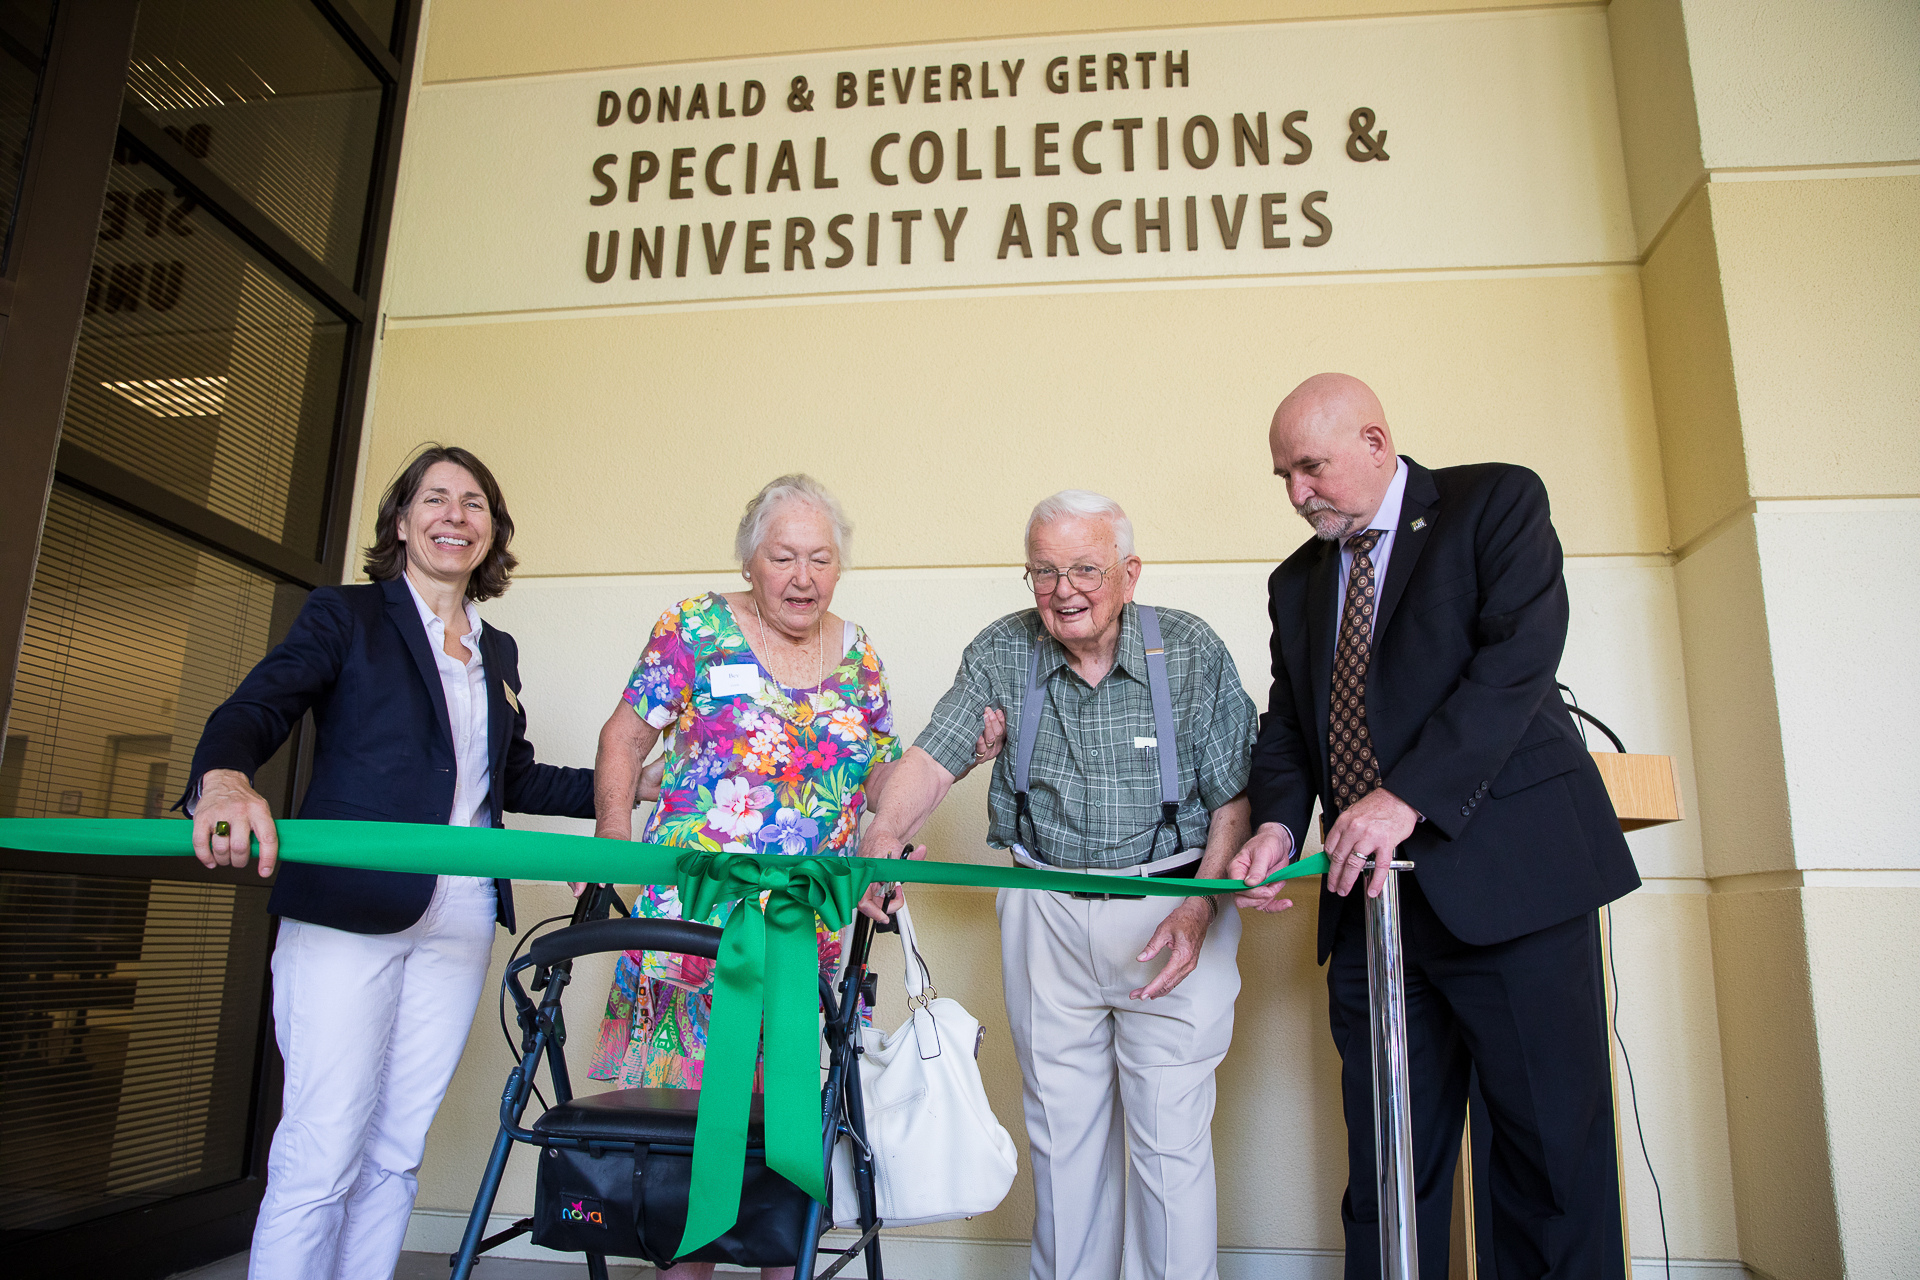 University Librarian Amy Kautzman, Beverly Gerth, Donald R. Gerth, and Sac State President Robert Nelsen, standing as Donald Gerth cuts a green ribbon, in front of the University's Special Collections and Archives